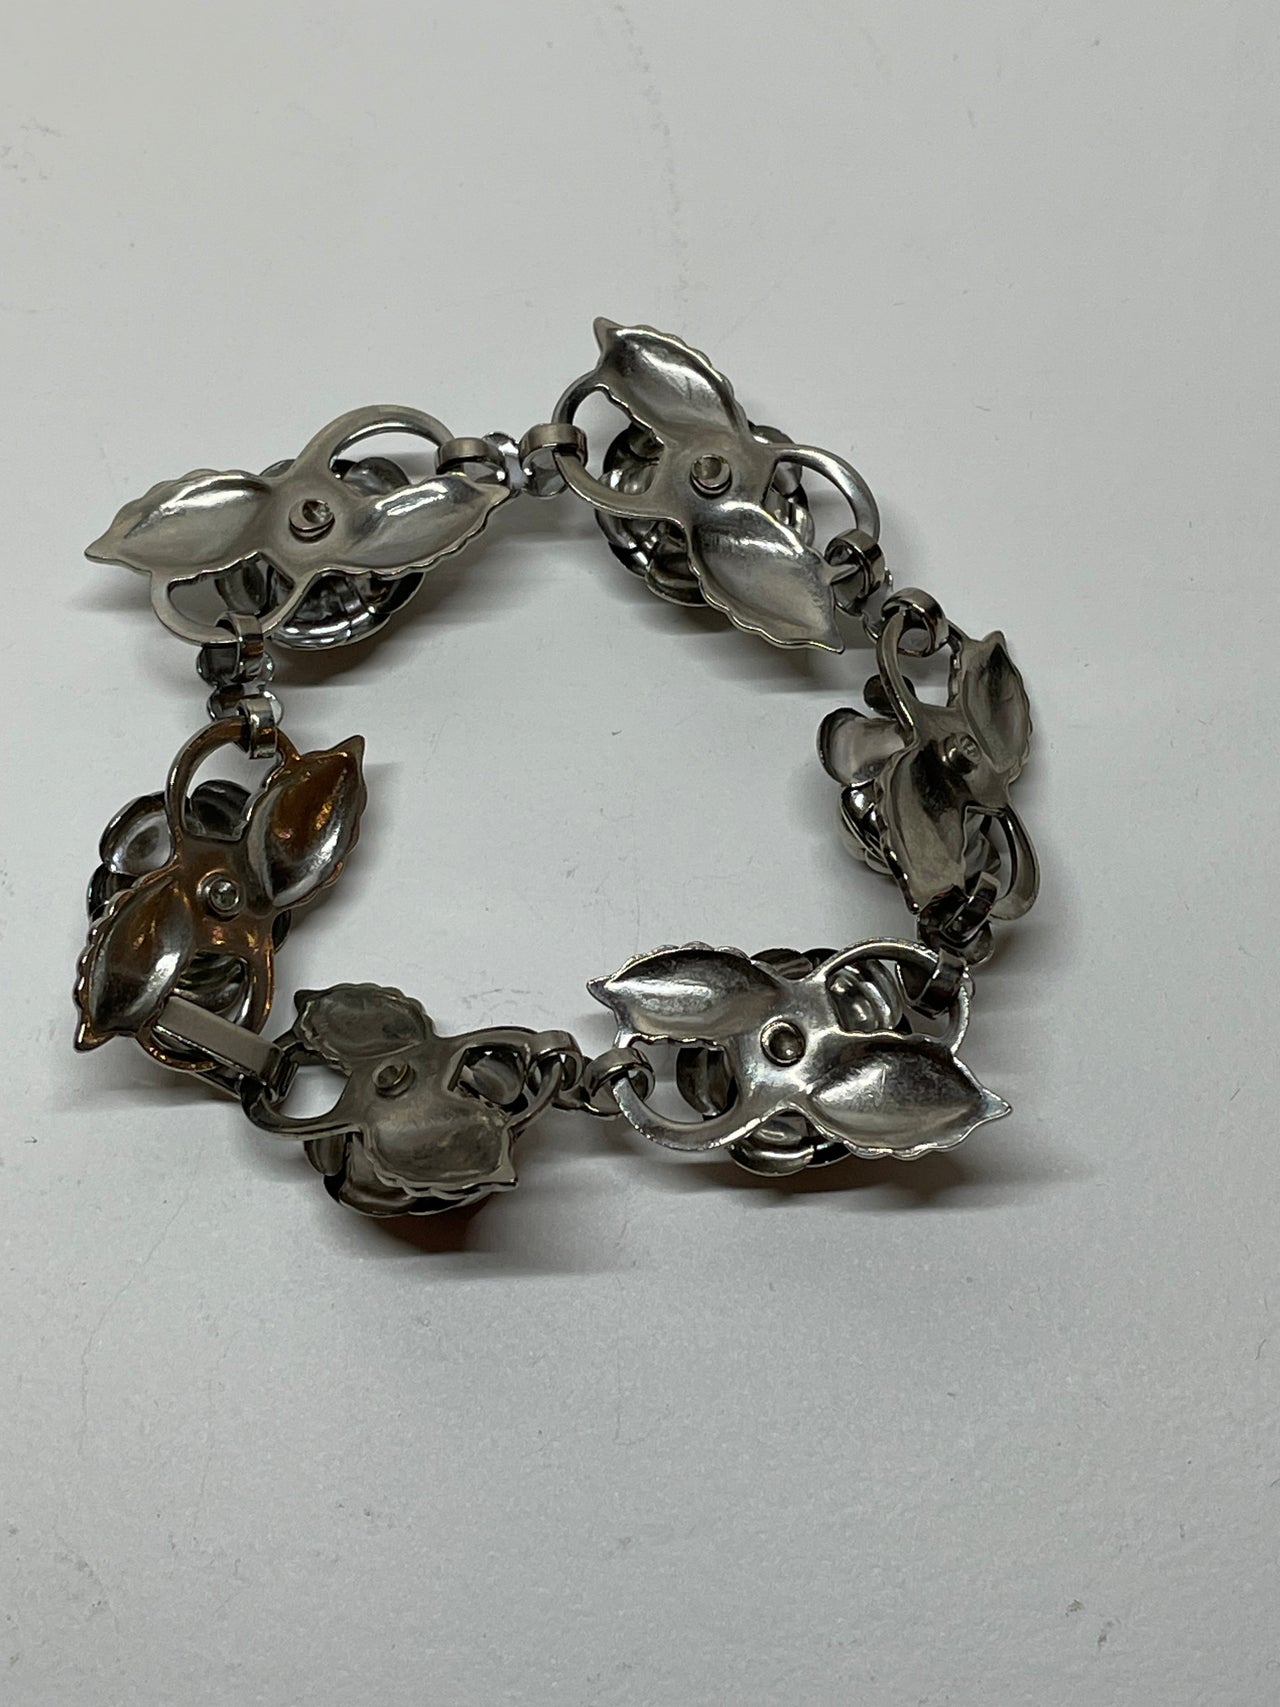 Silver Rose Bracelet Bloomers and Frocks 